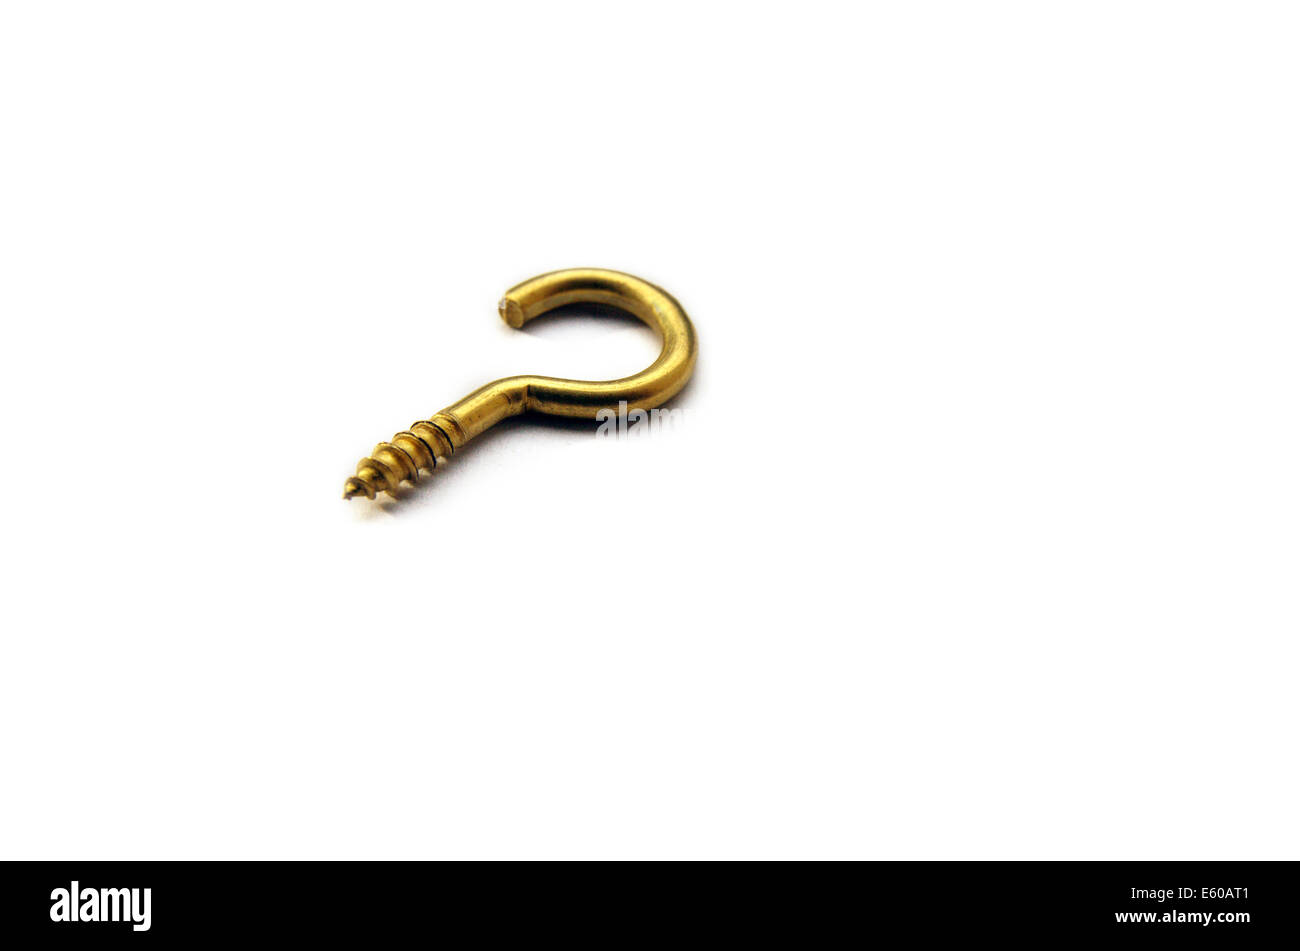 Golden Wall Hook Isolated On White Background Stock Photo